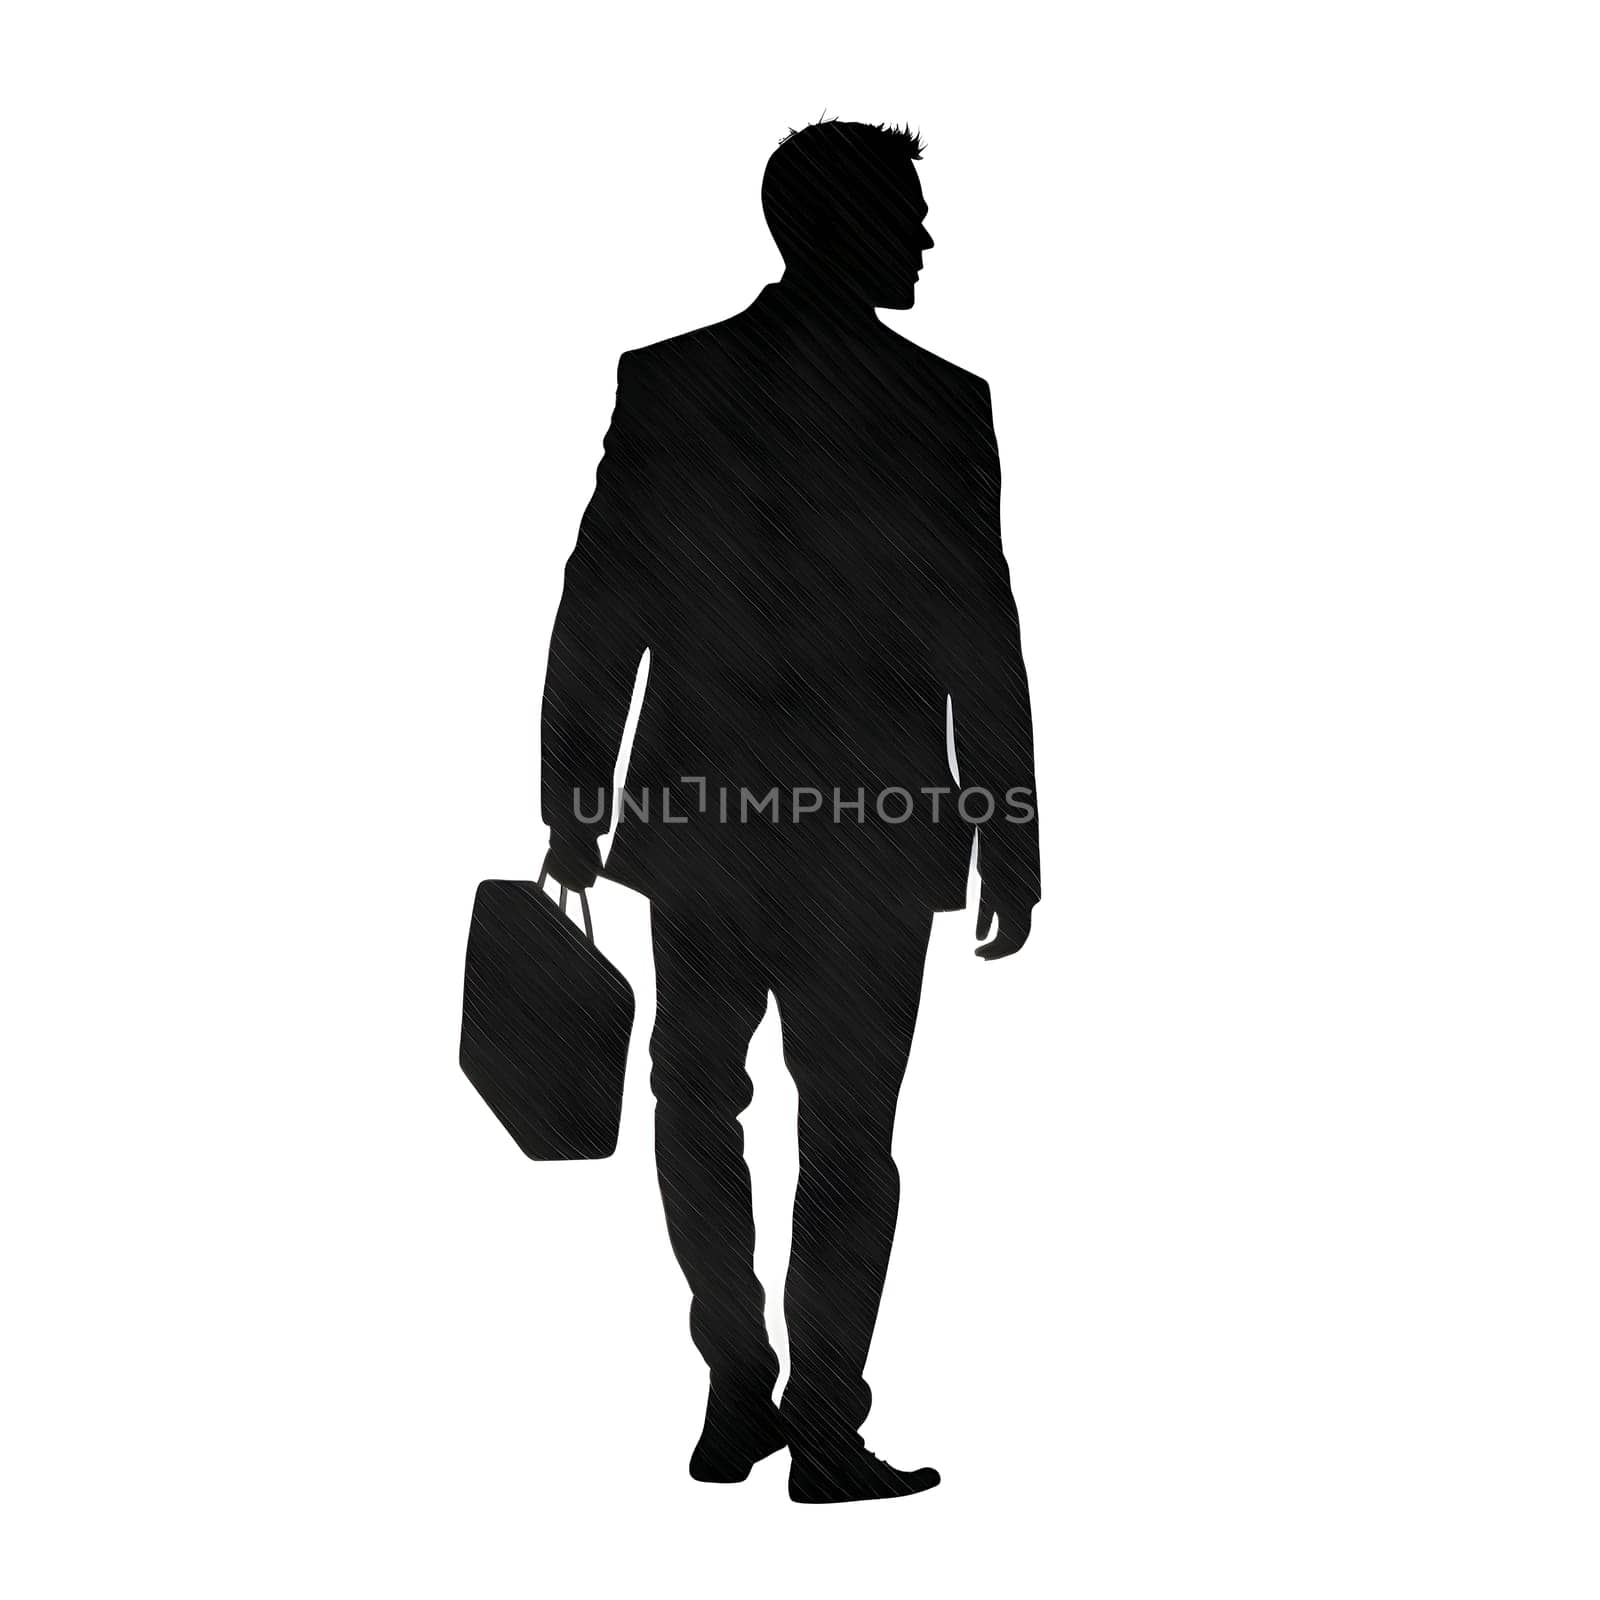 Vector illustration of a man with valise in black silhouette against a clean white background, capturing graceful forms.